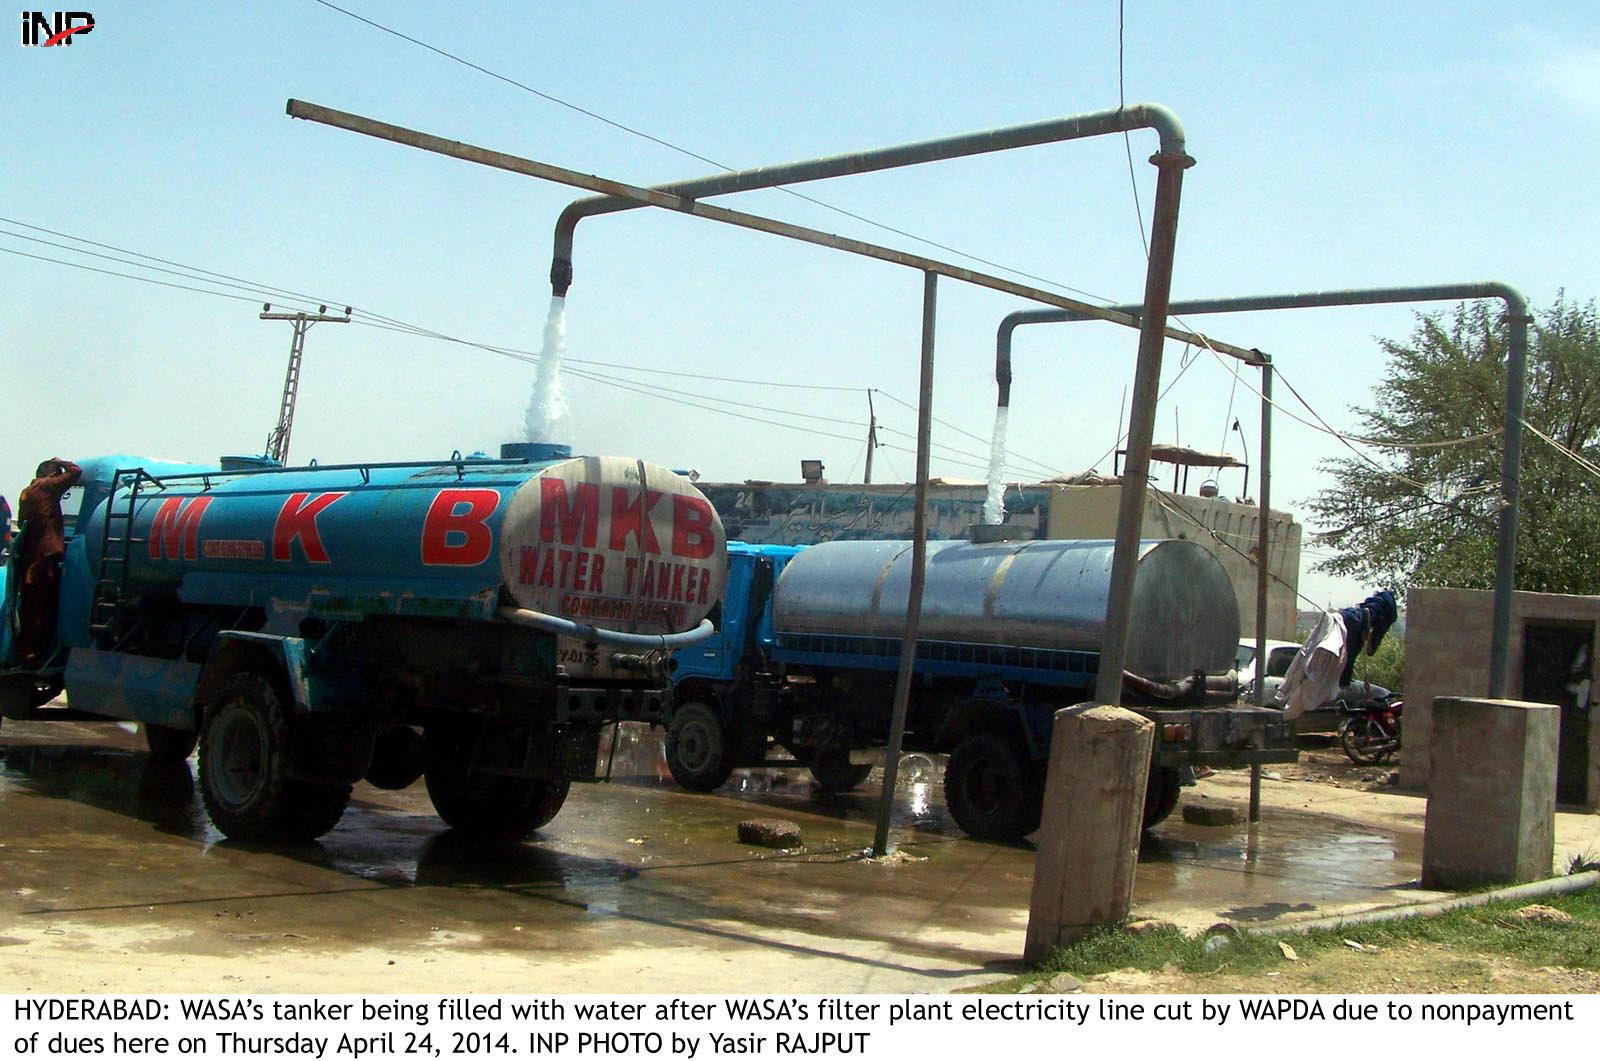 tankers 039 association claims kwsb officials demand bribes from legal hydrants photo inp